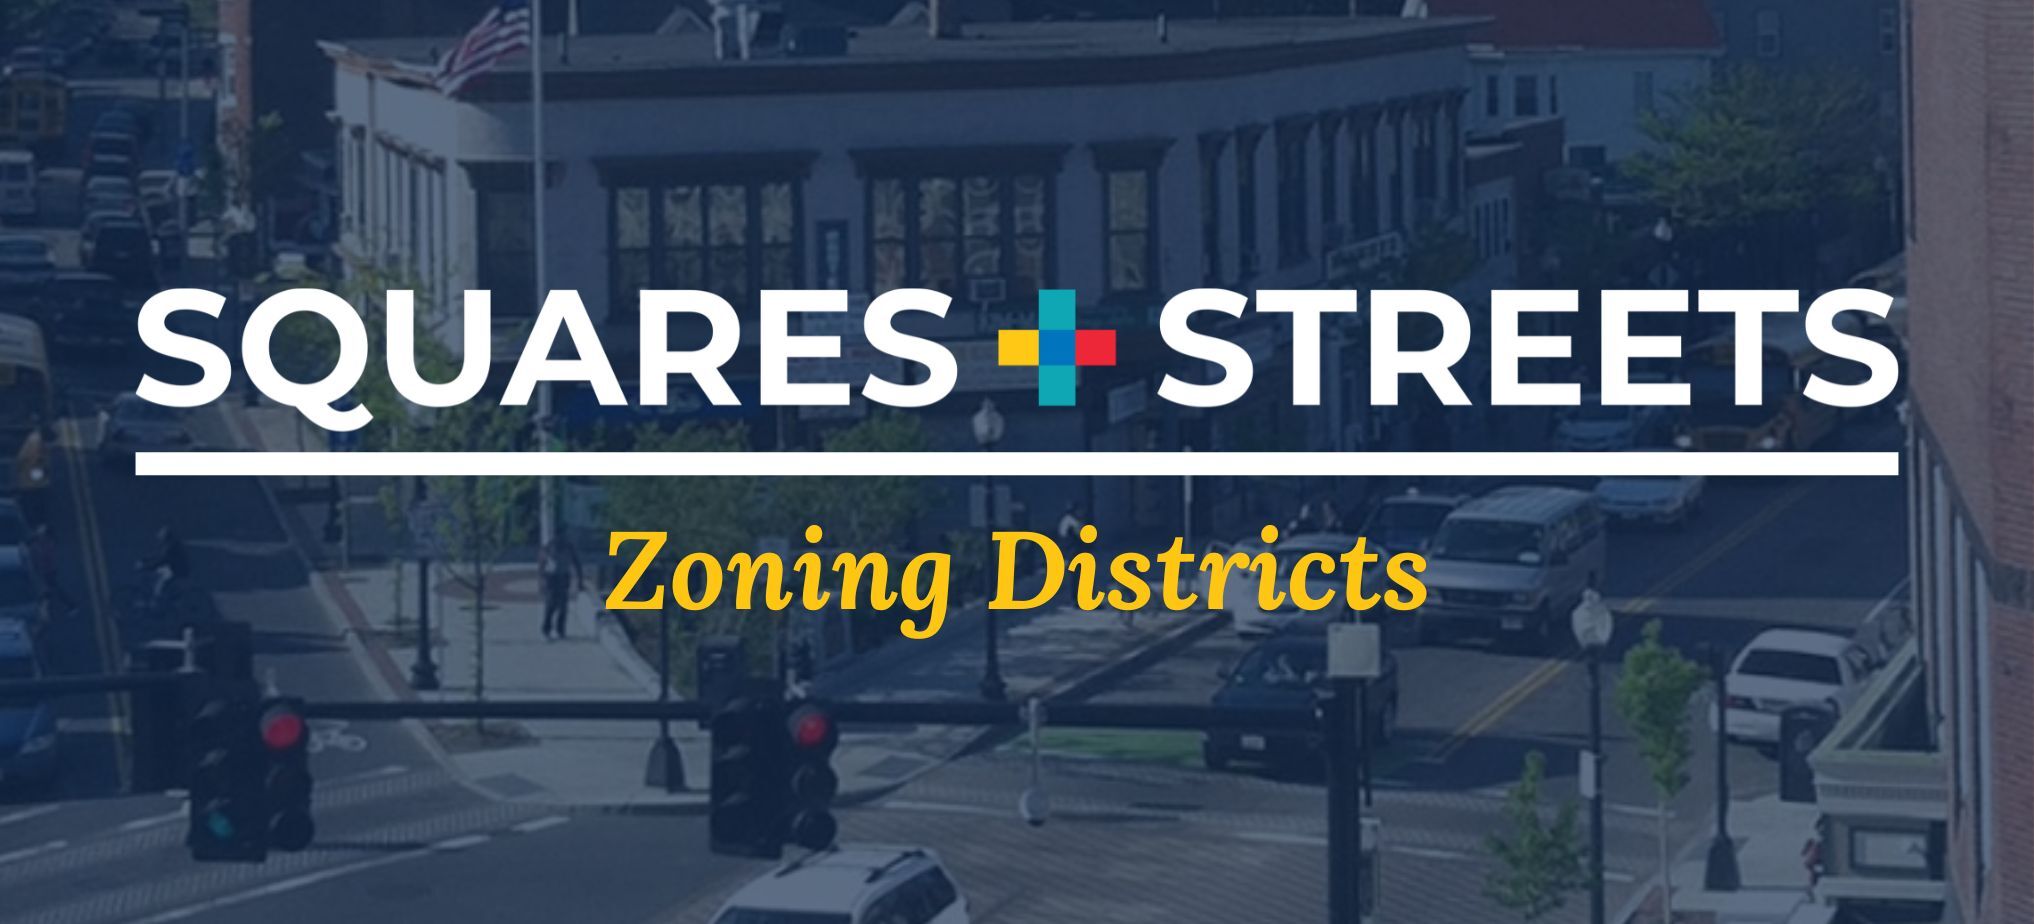 Squares + Streets Zoning Districts logo banner